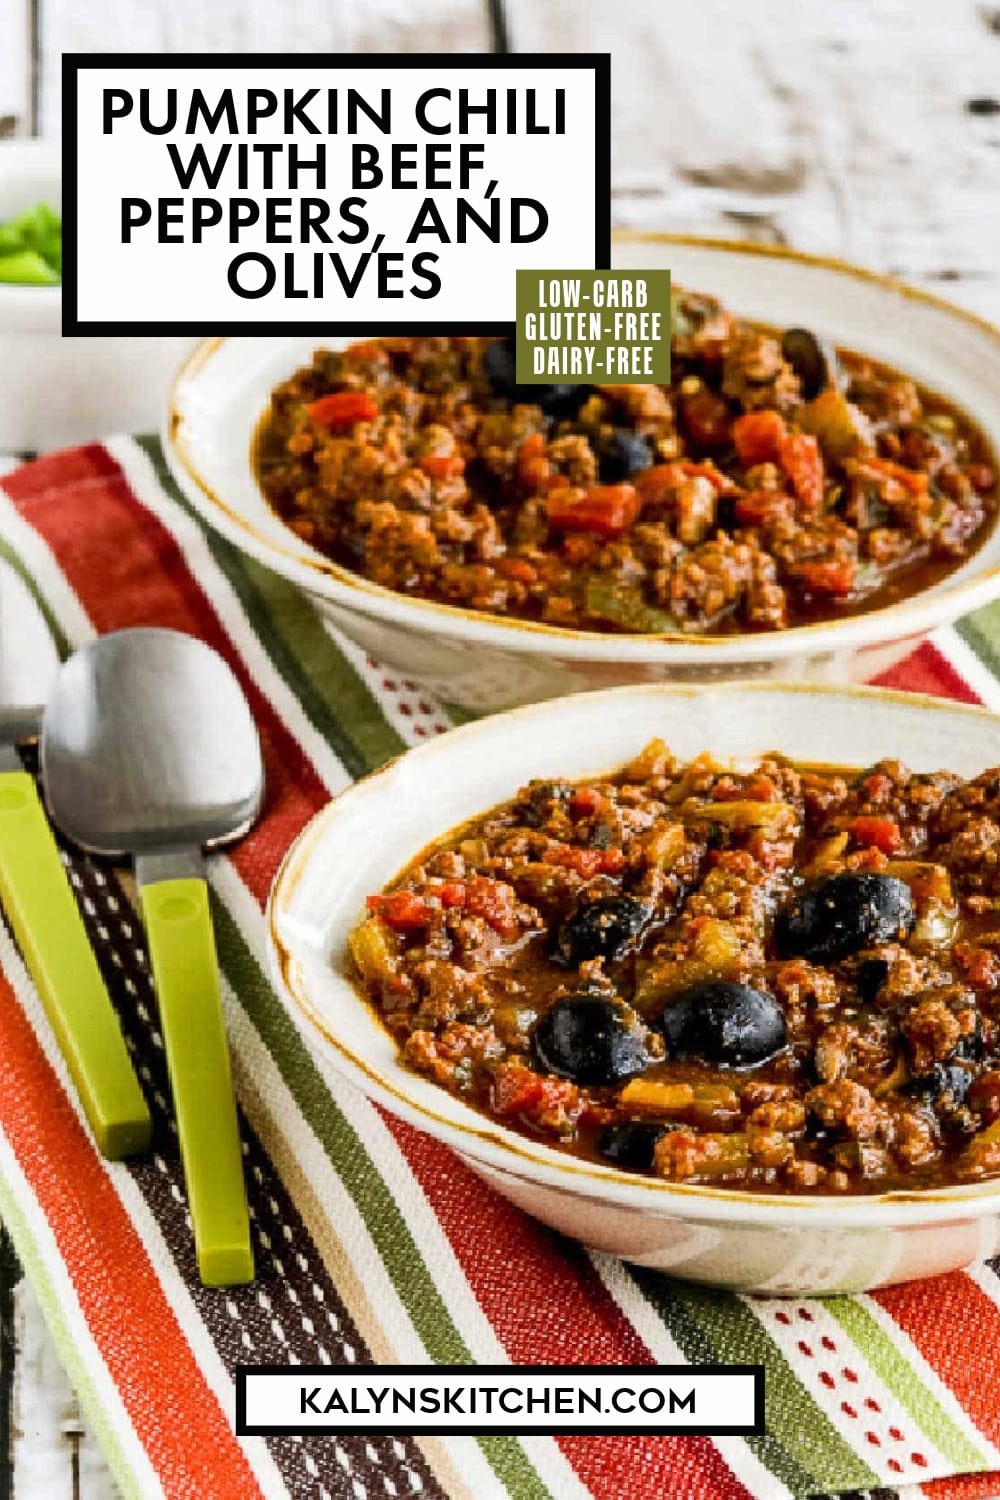 Pinterest image of Pumpkin Chili with Beef, Peppers, and Olives